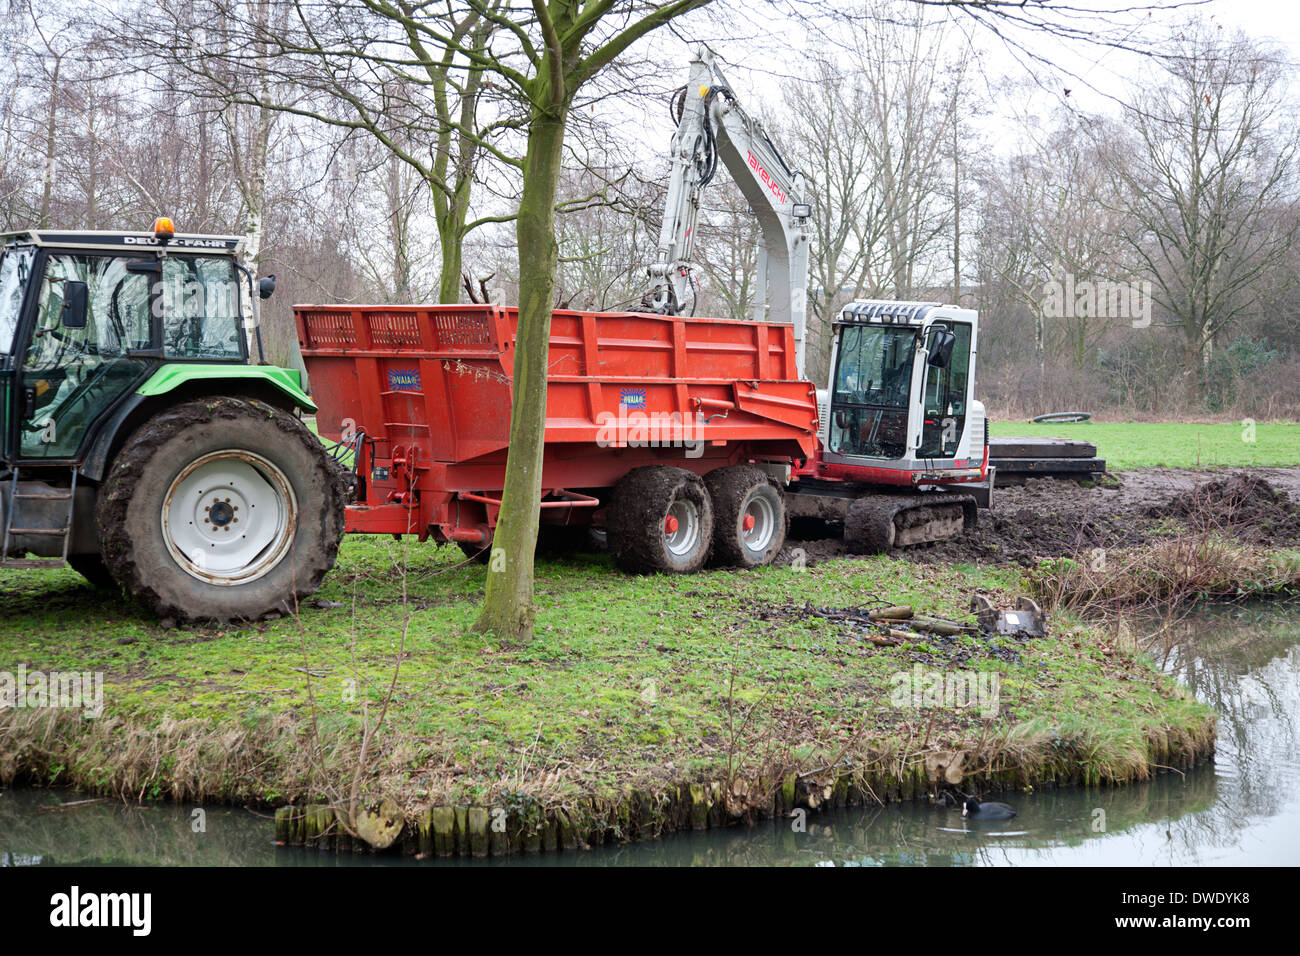 Tractor, crane and transport vehicle working in a park Stock Photo